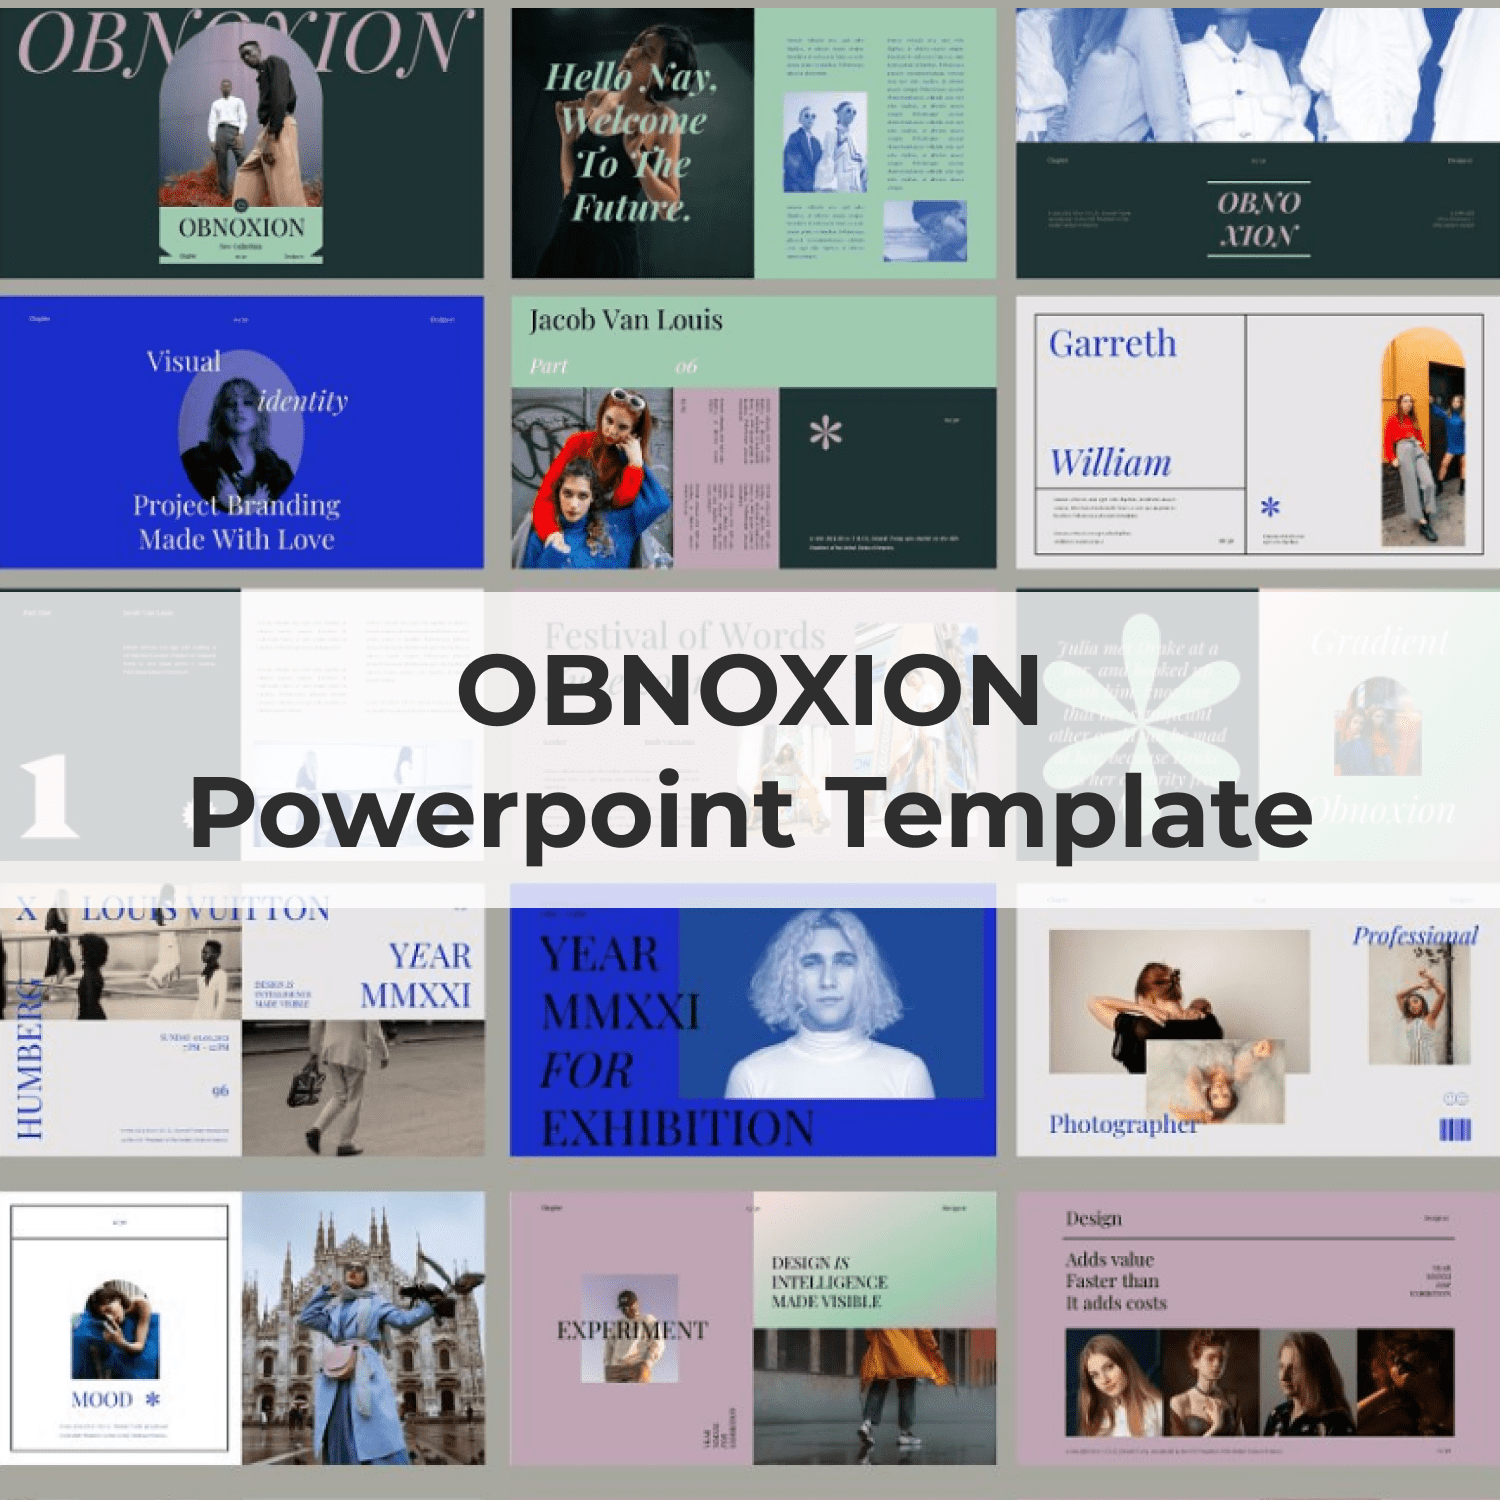 OBNOXION Powerpoint Template main cover.